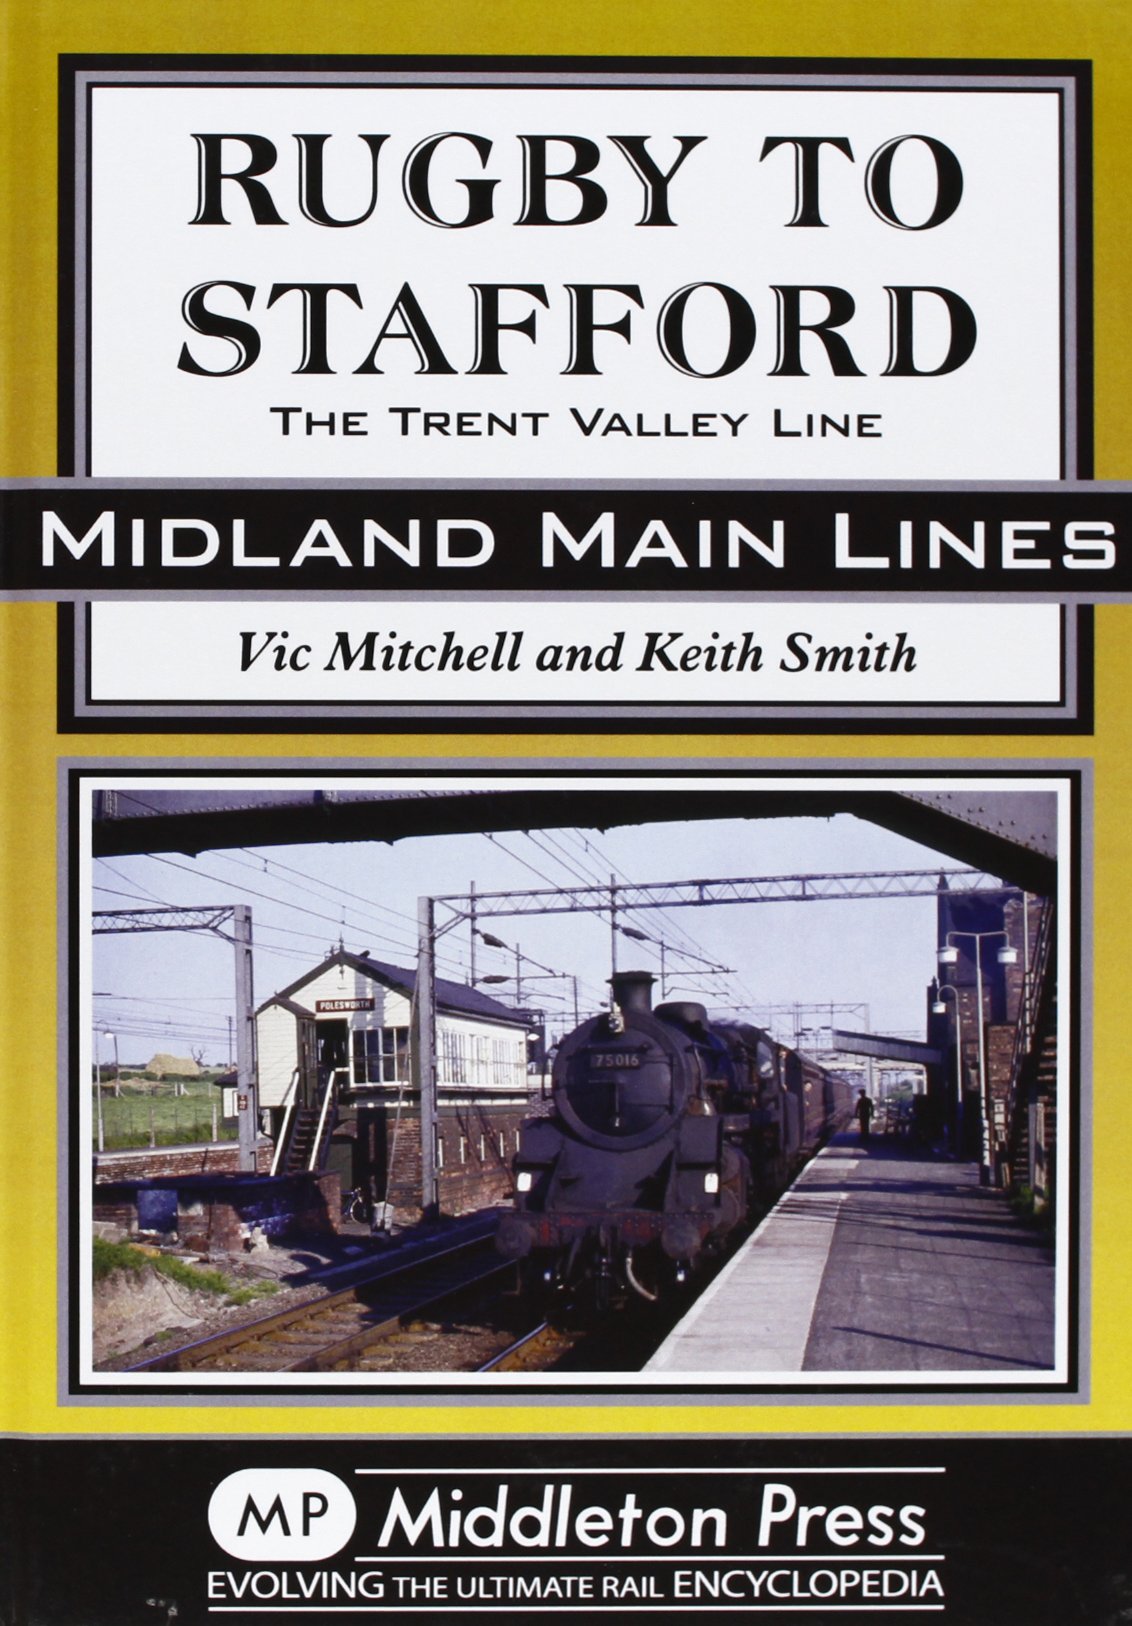 Midland Main Lines Rugby to Stafford The Trent Valley Line